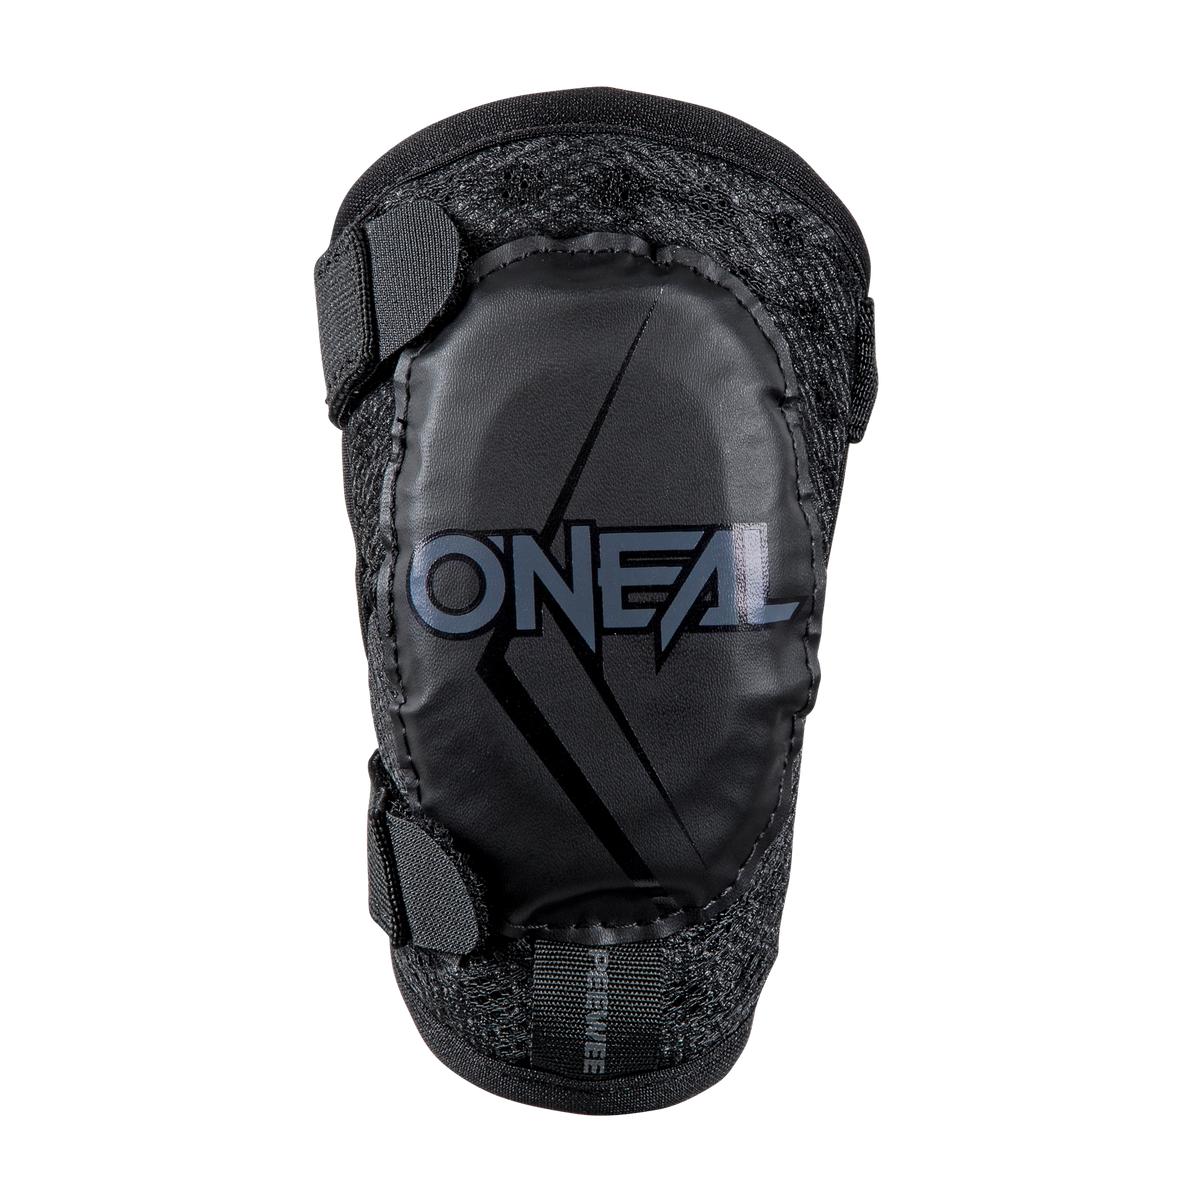 https://cdn.oneal.eu/assets/importedProductImages/PROTECTION/YOUTH/ELBOW/PEEWEE/black/2017_ONeal_PeeWee_Elbow_Guard_black.png